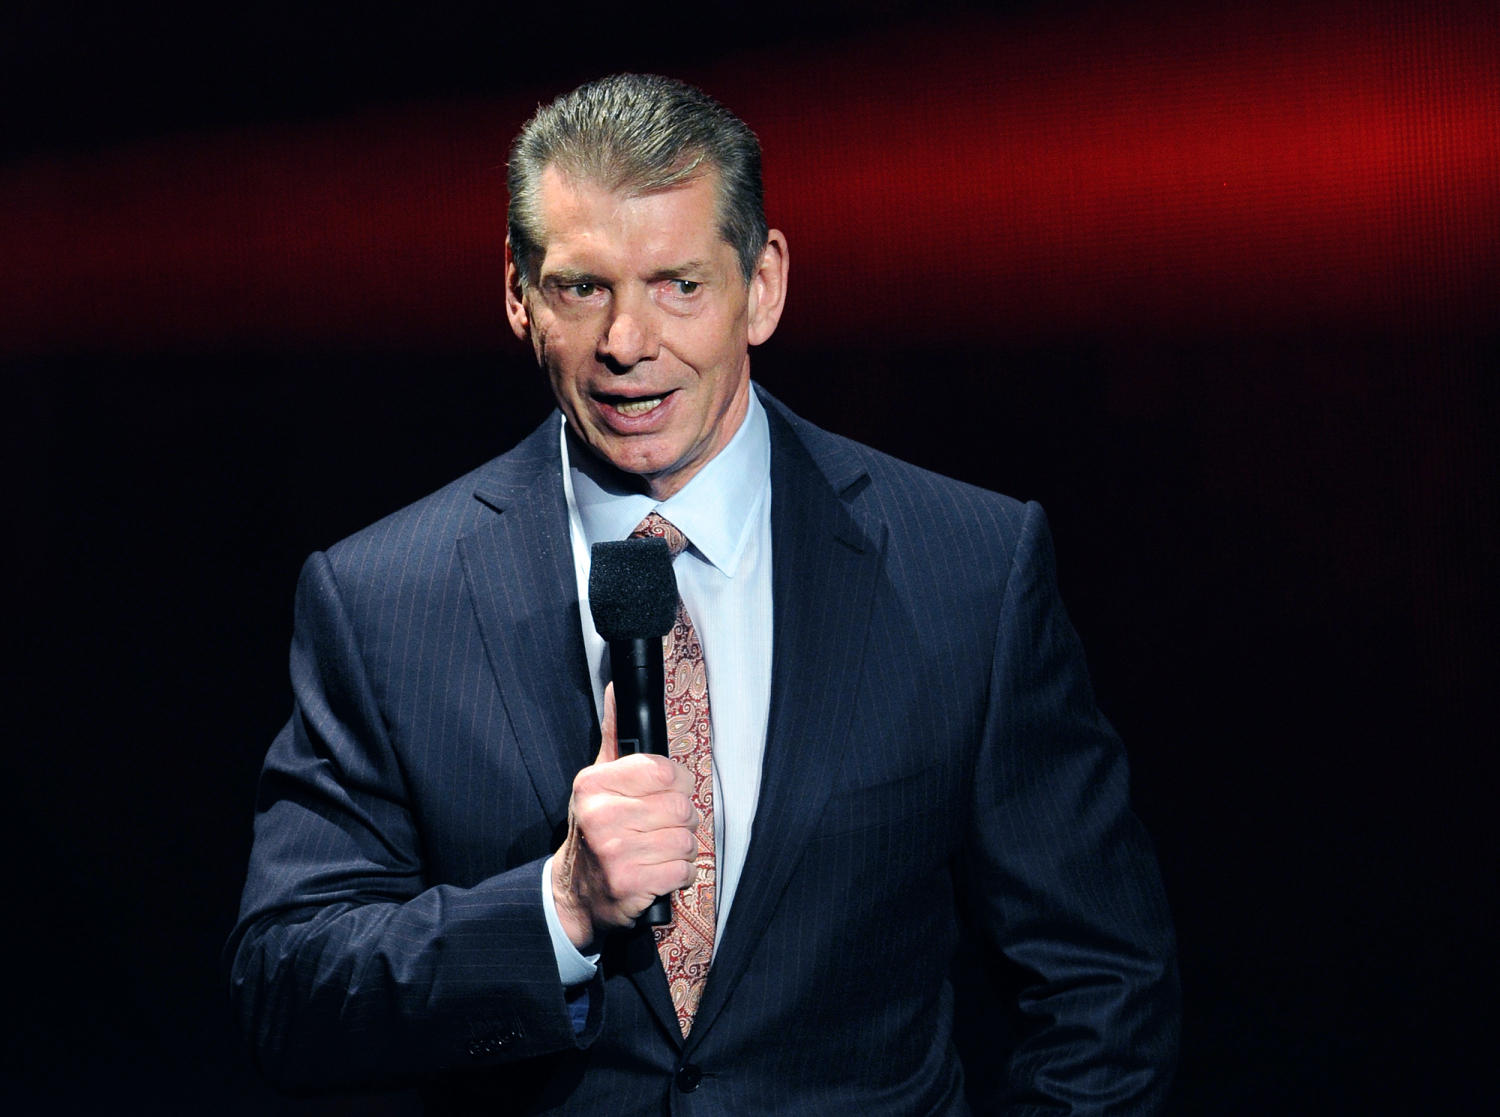 WWE founder Vince McMahon is under federal investigation surrounding sex trafficking allegations, sources say